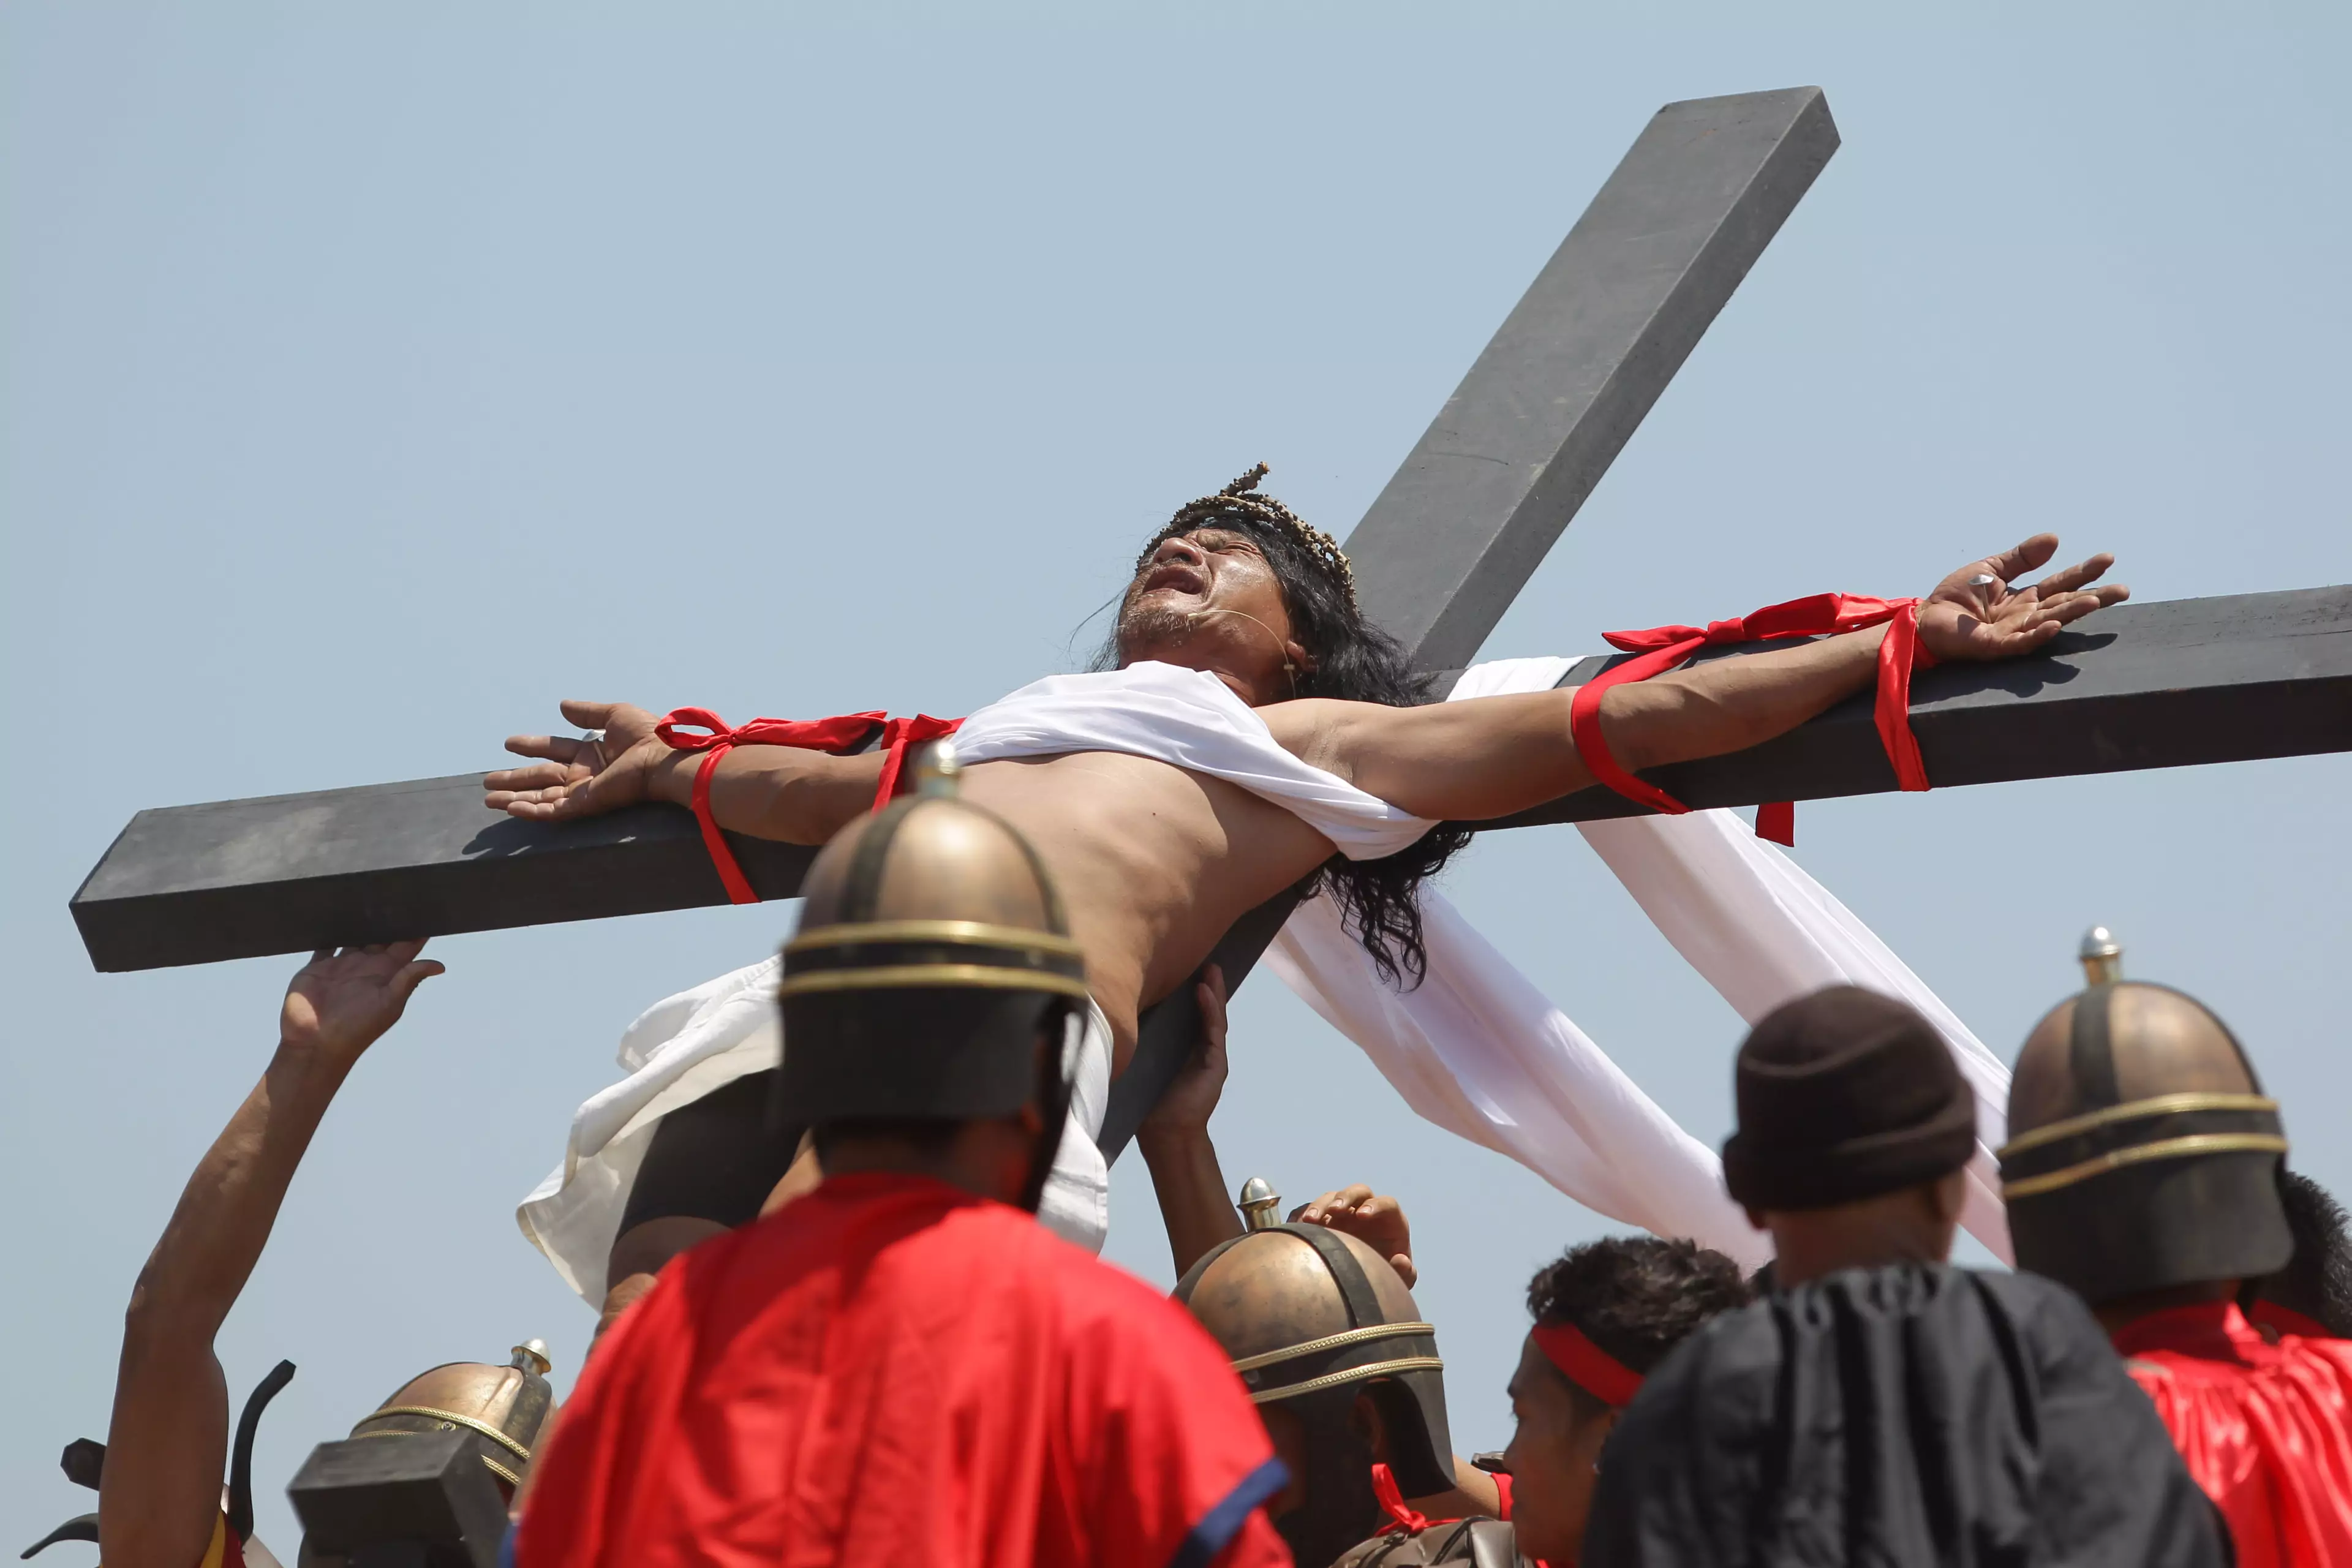 Ruben Enaje is crucified during the celebration in 2015.